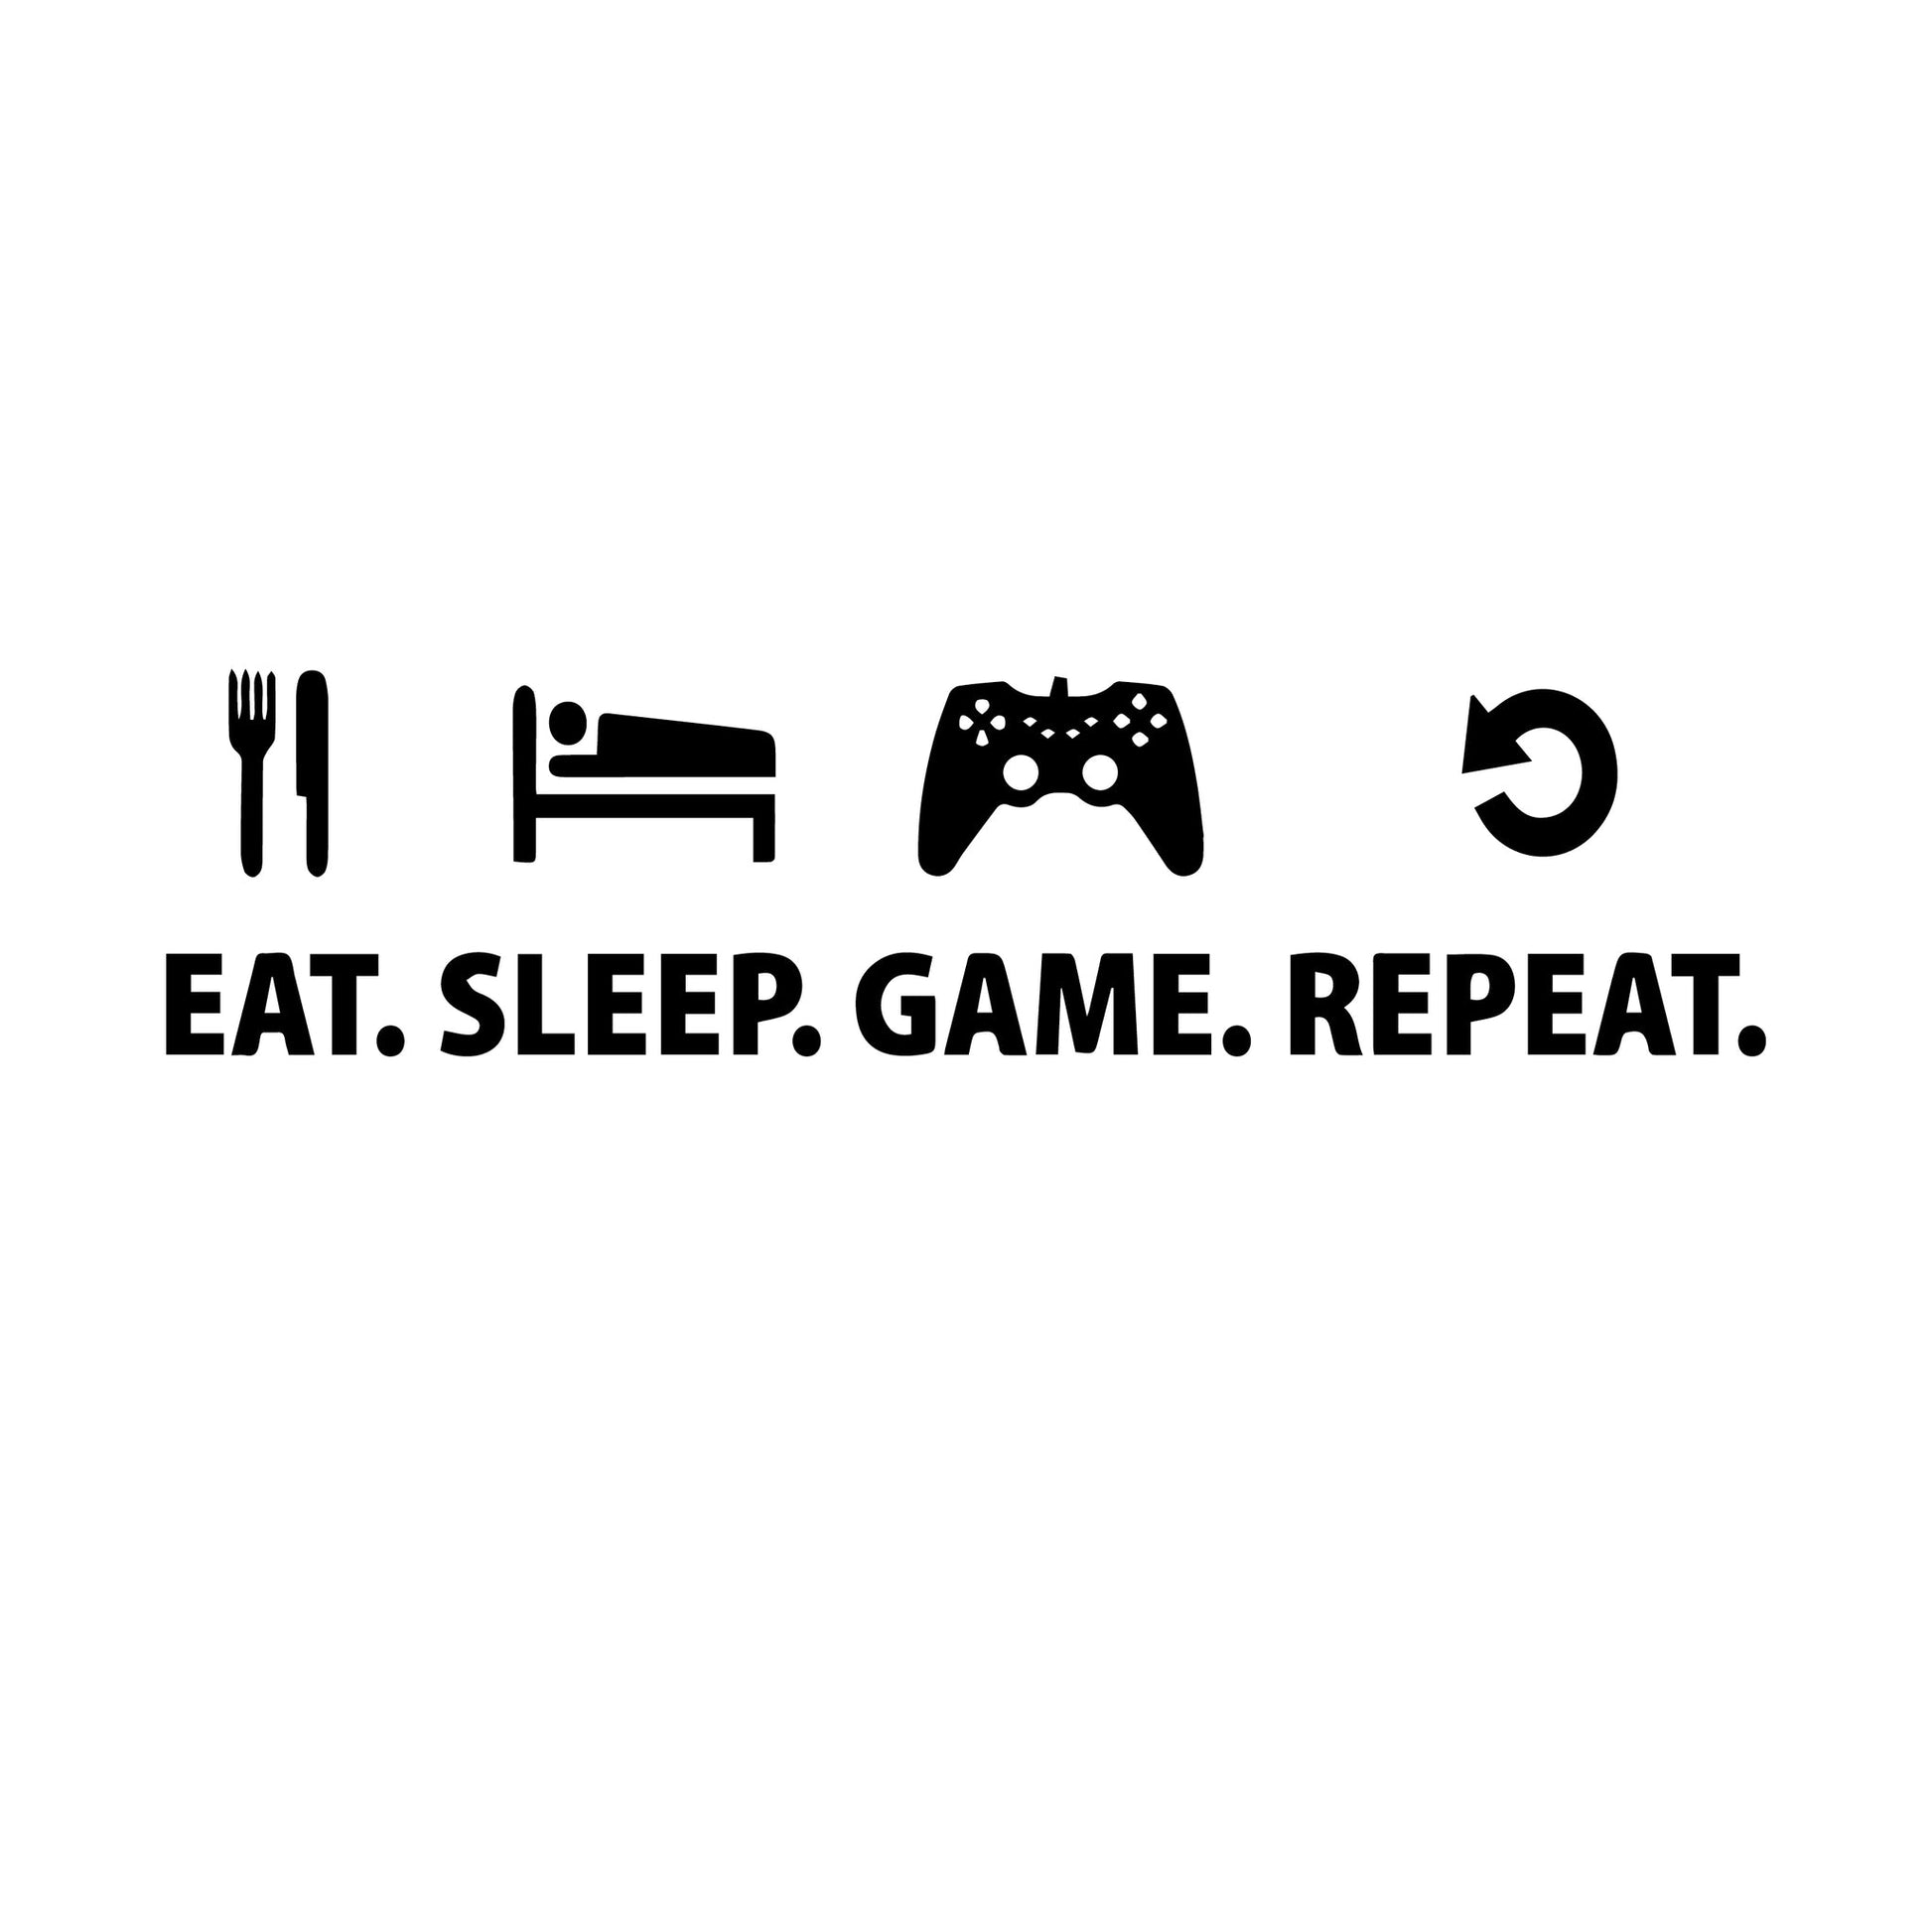 Eat Sleep Game Repeat - Wall Decal Sticker